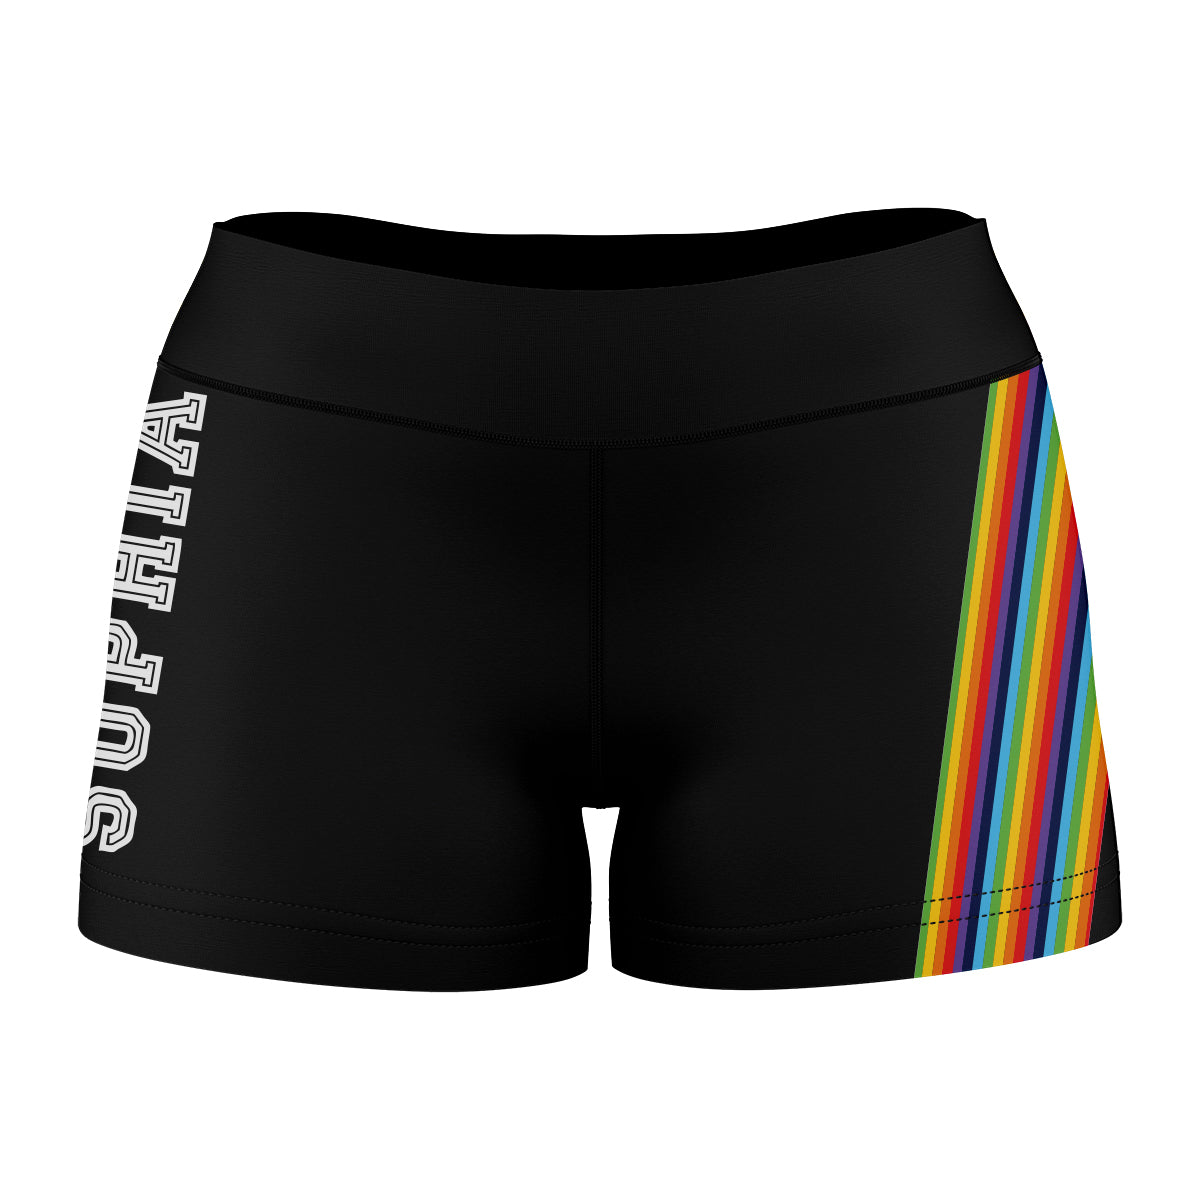 Stripes Personalized Name Black Shorties